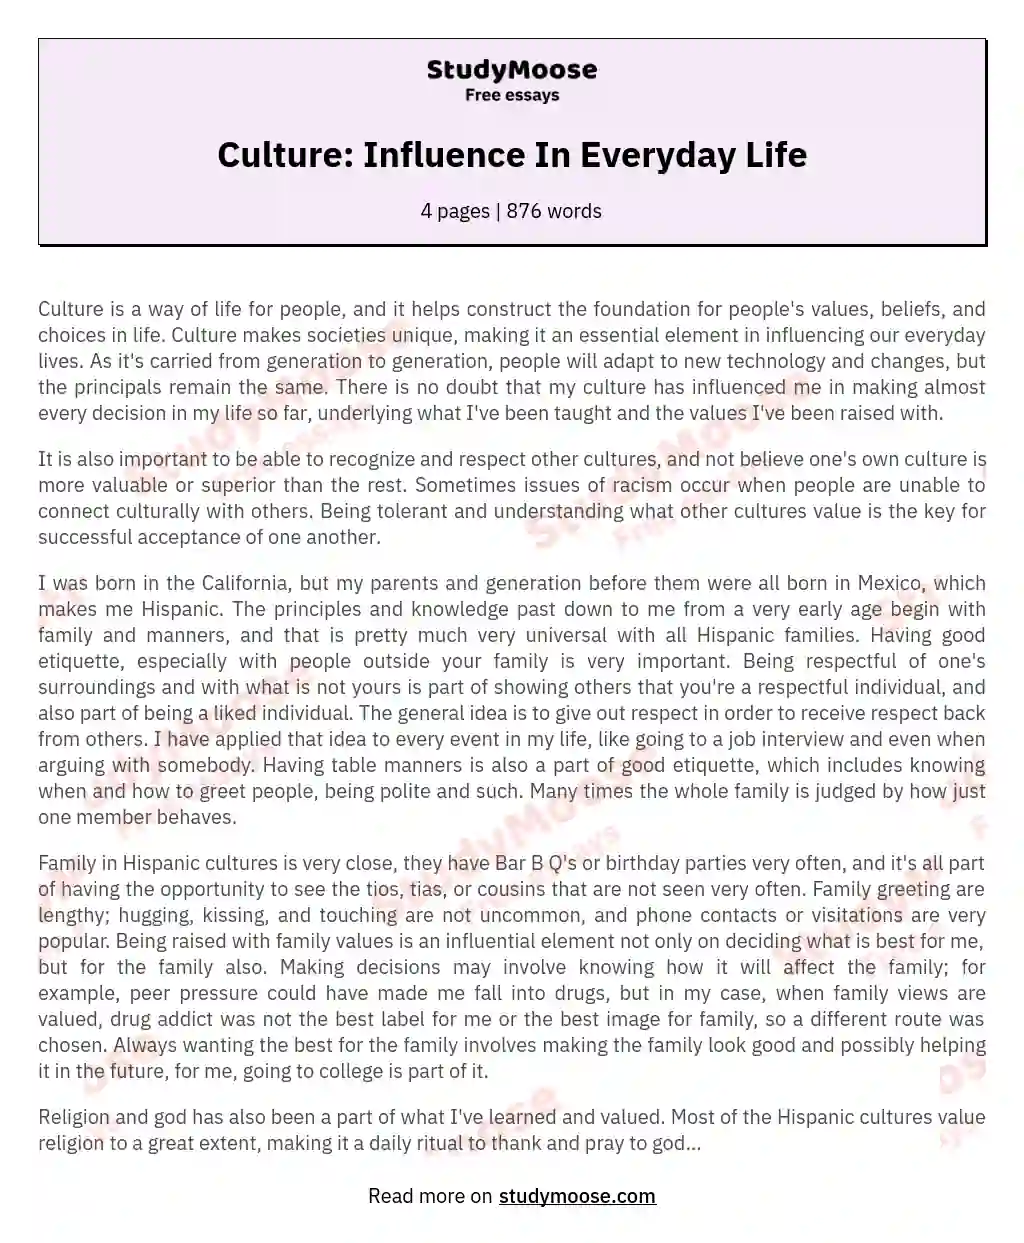 Culture: Influence In Everyday Life essay